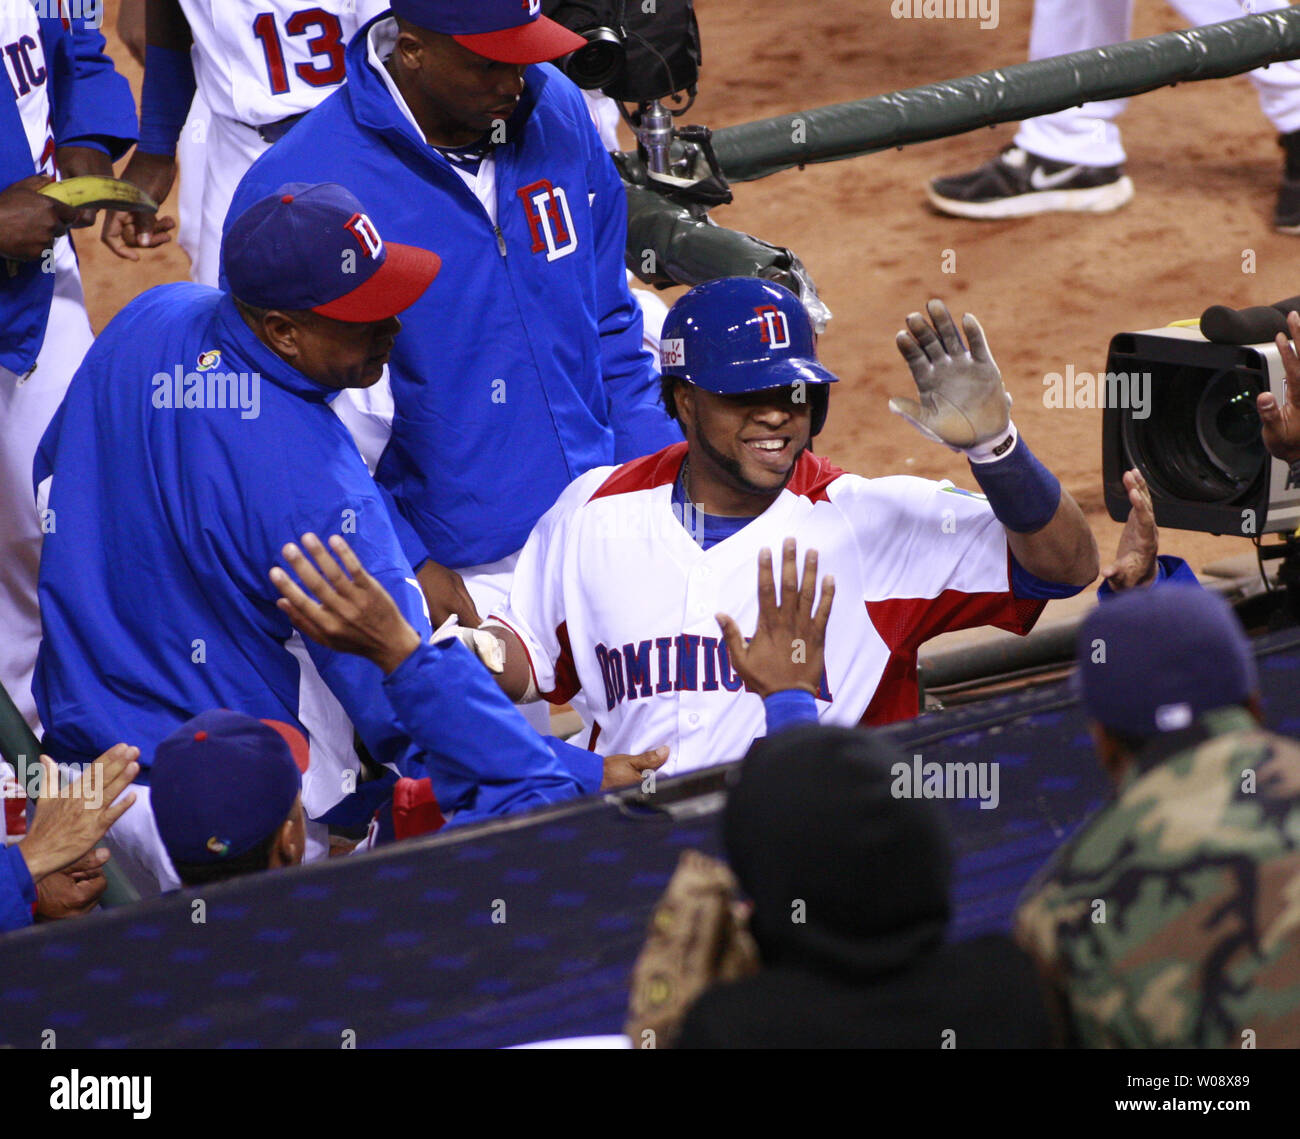 Dominican Republic's Carlos Santana is congratulated at the dugout after scoring against Netherlands in the fifth inning of the semi finals of the World Baseball Classic at AT&T Park in San Francisco on March 18, 2013. Dominican Republic defeated Netherlands 4-1.   UPI/Bruce Gordon Stock Photo